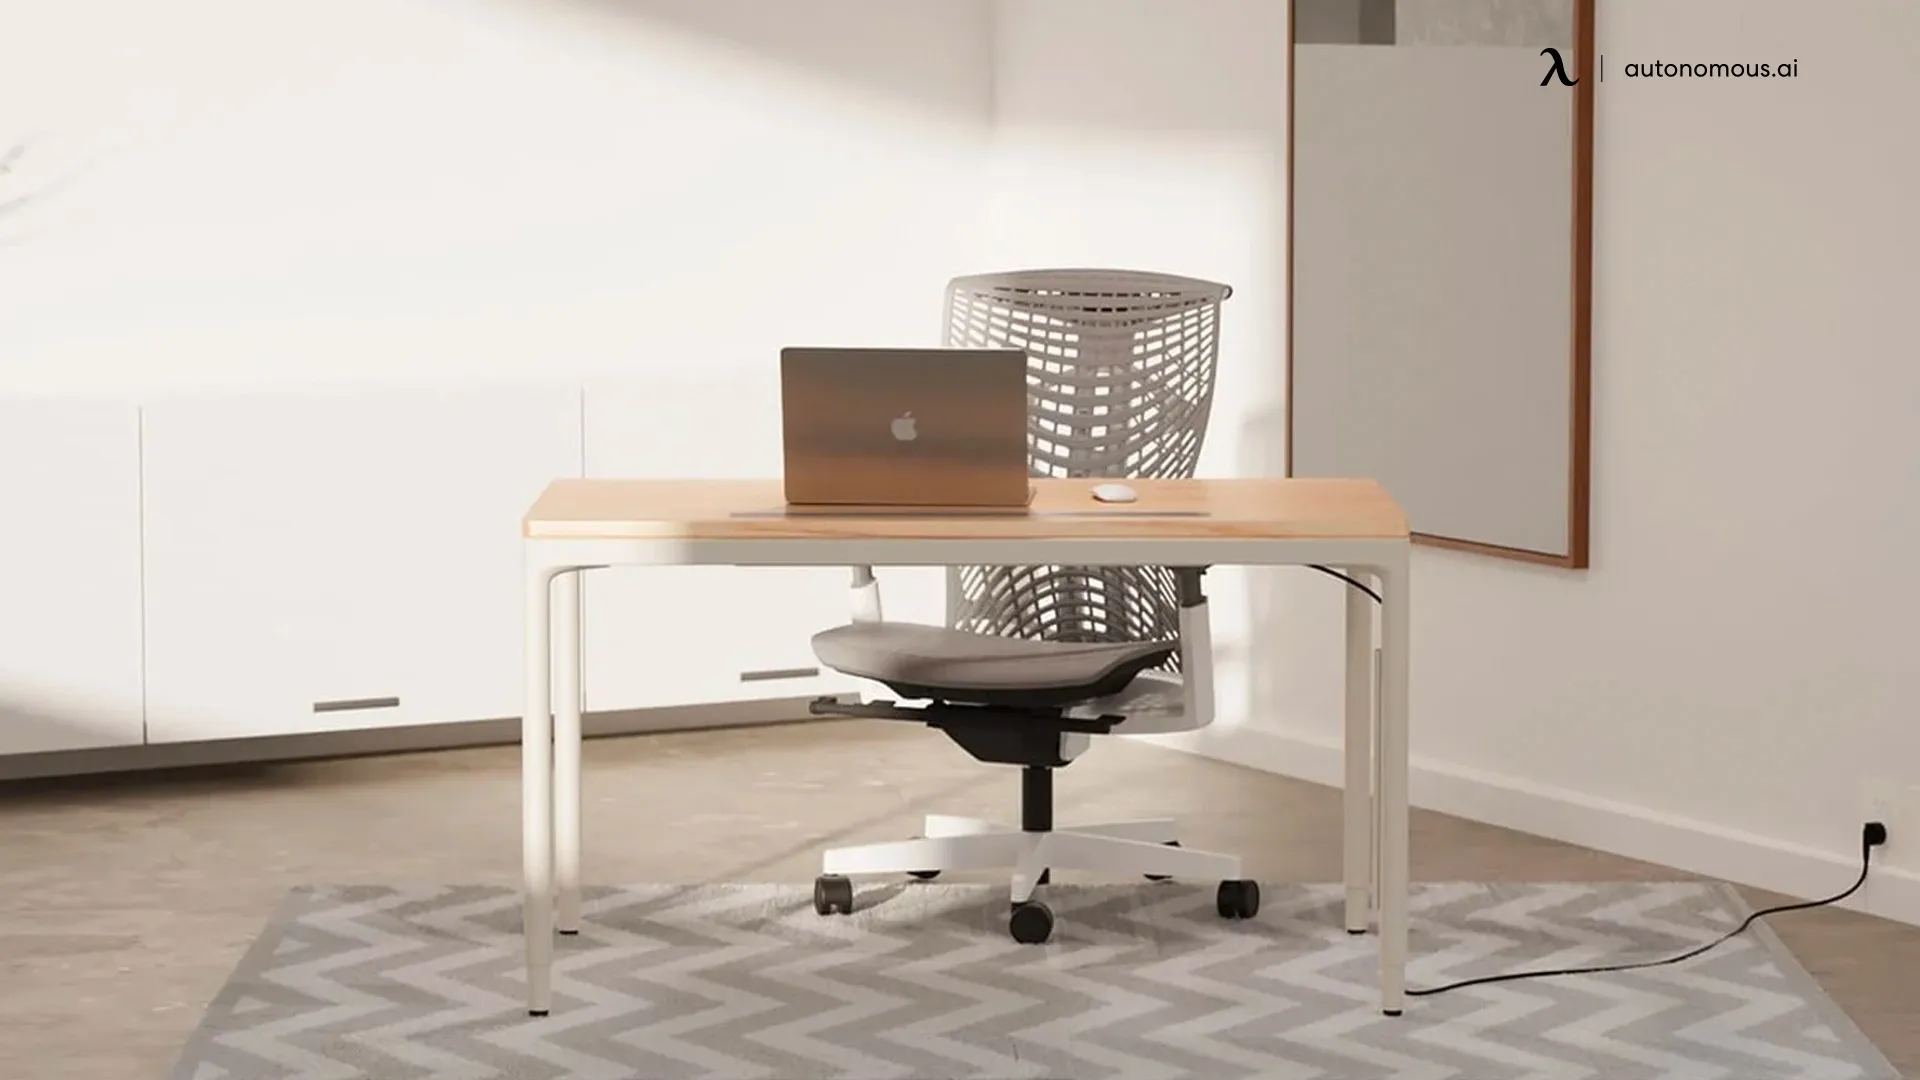 Evaluate the Desk's Height Adjustability.